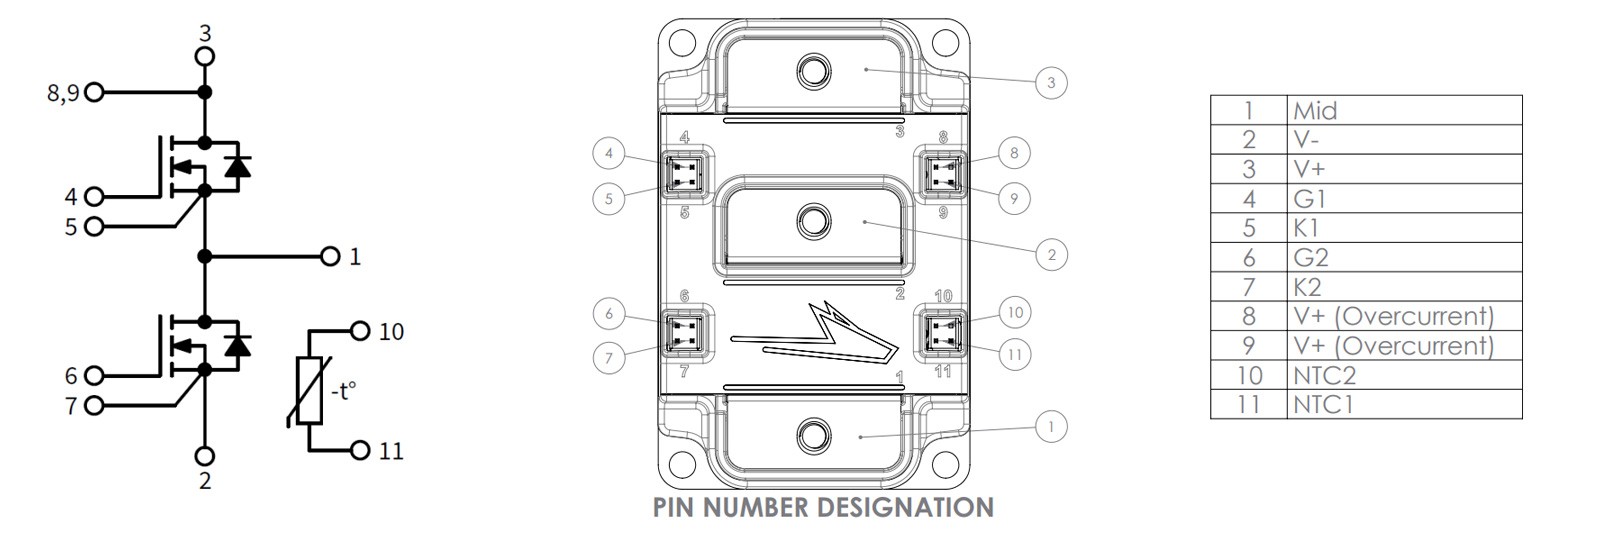 A three part illustration showing an EAB450M12XM3's internet wiring schematic. On the left is a circuit diagram. The middle is a line drawing of an XM3 module with pin number locations enumerated on it. The right is a table that tells you which number accounts for what pin designation.